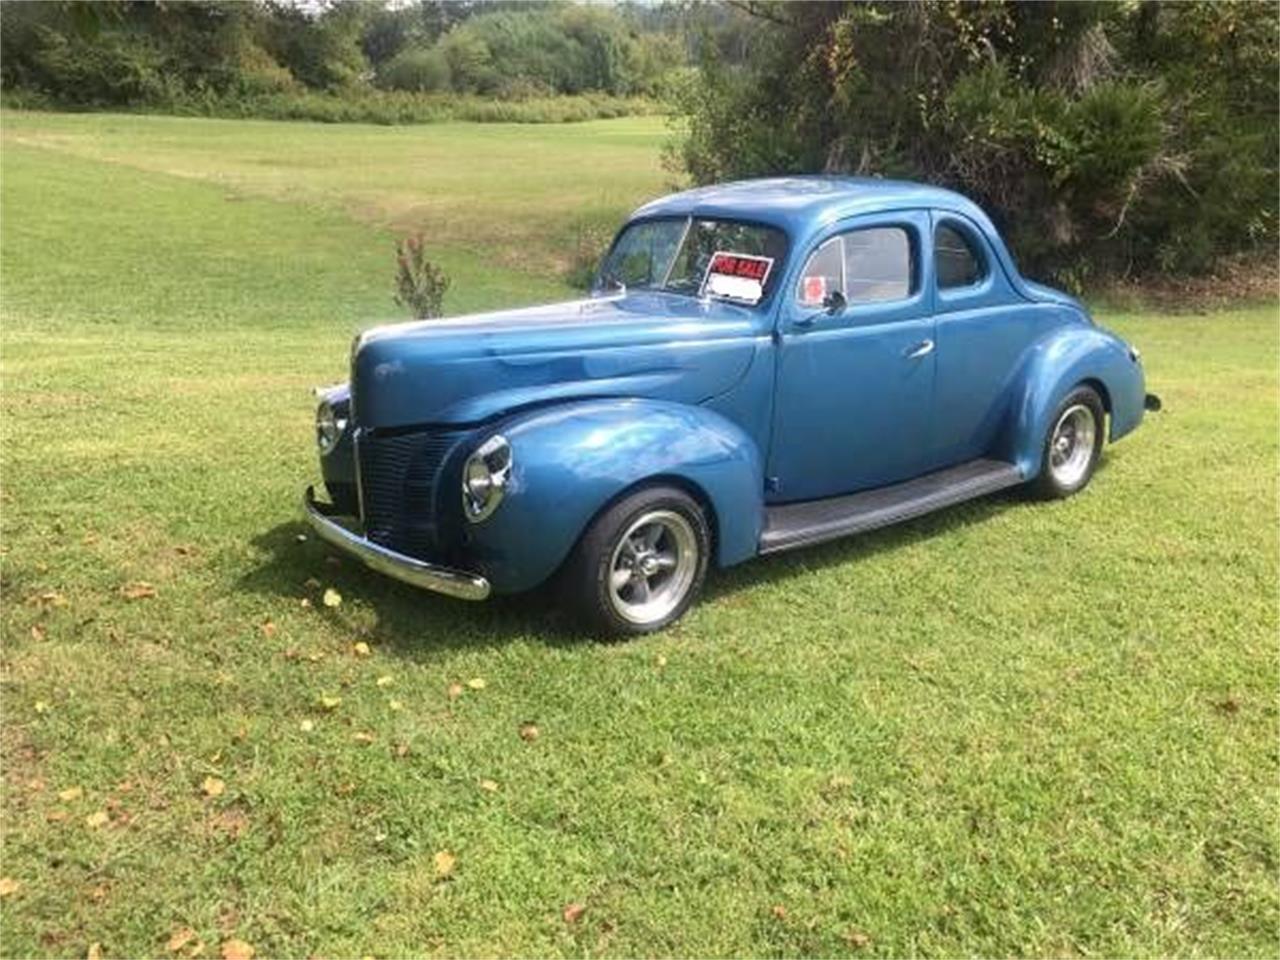 1940 Ford Coupe for sale located in Cadillac, Michigan - $38,495 (ClassicCa...